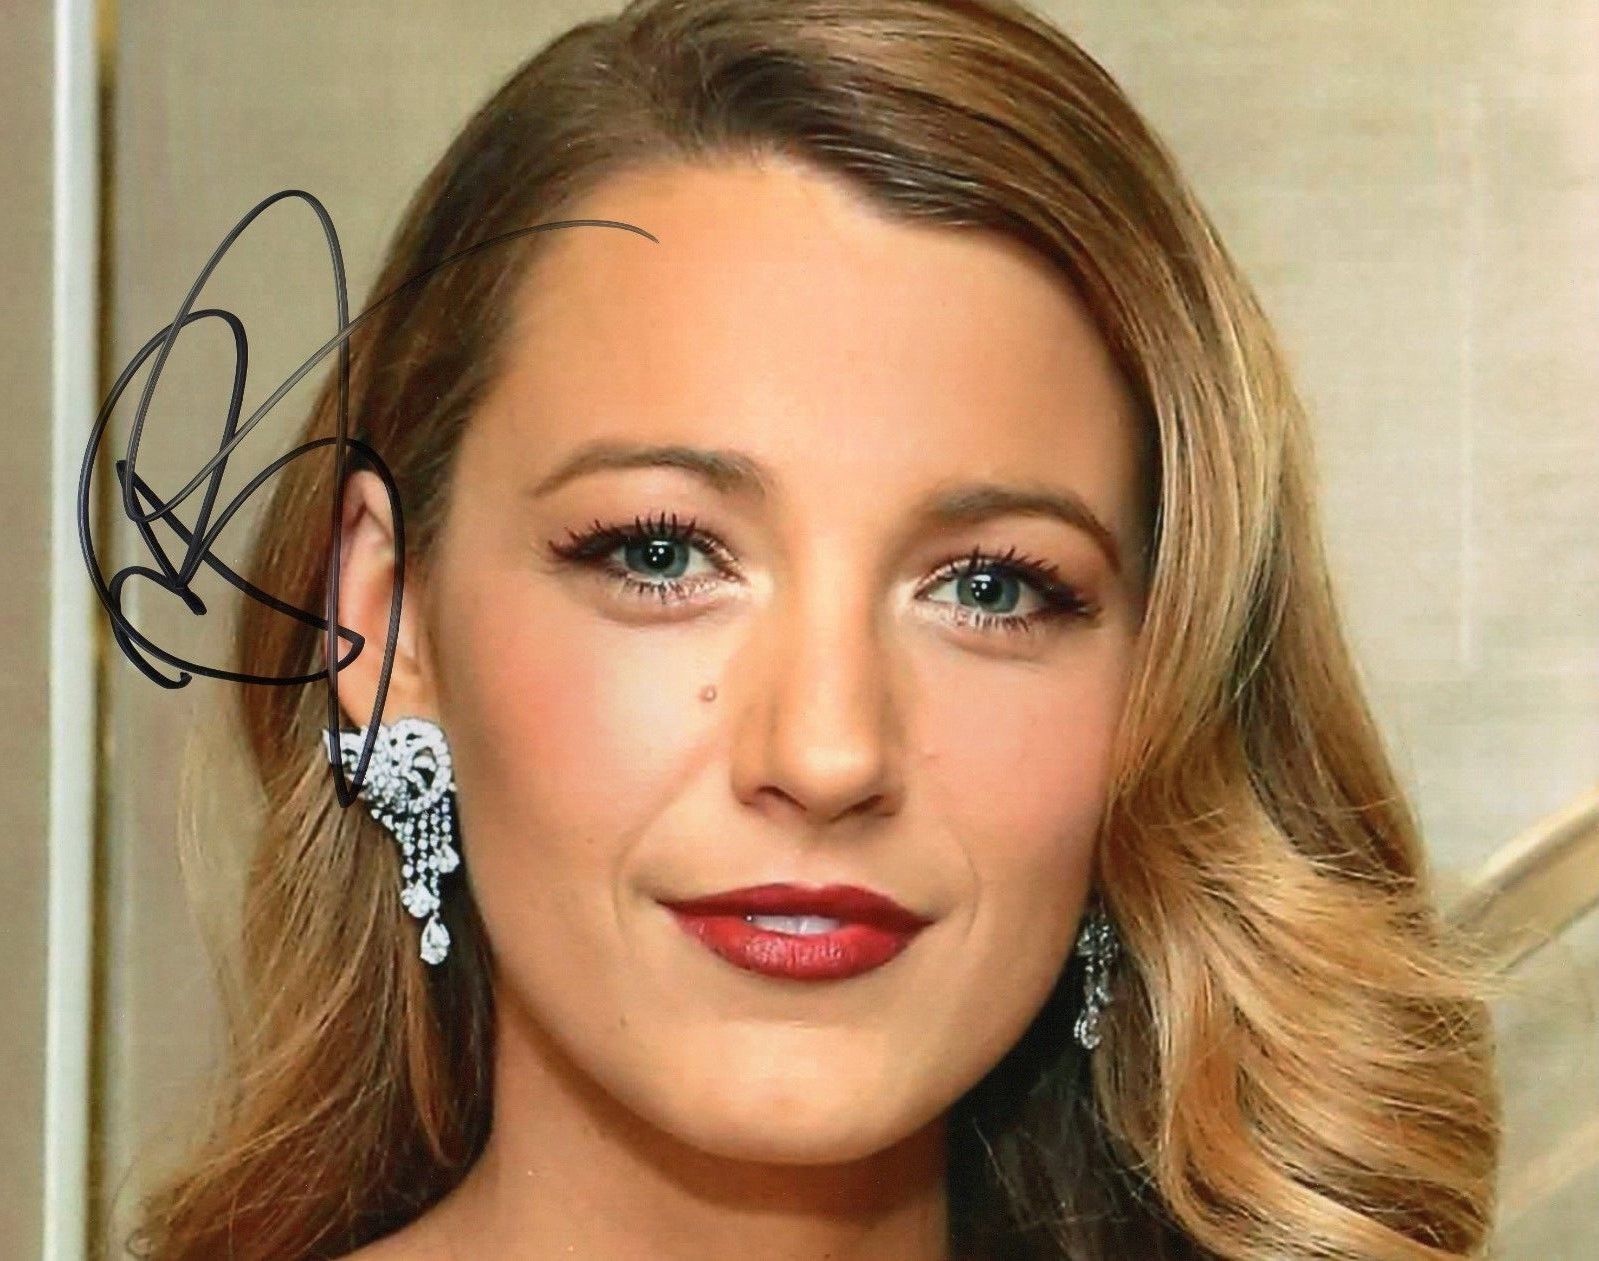 BLAKE LIVELY AUTOGRAPHED SIGNED A4 PP POSTER Photo Poster painting PRINT 16